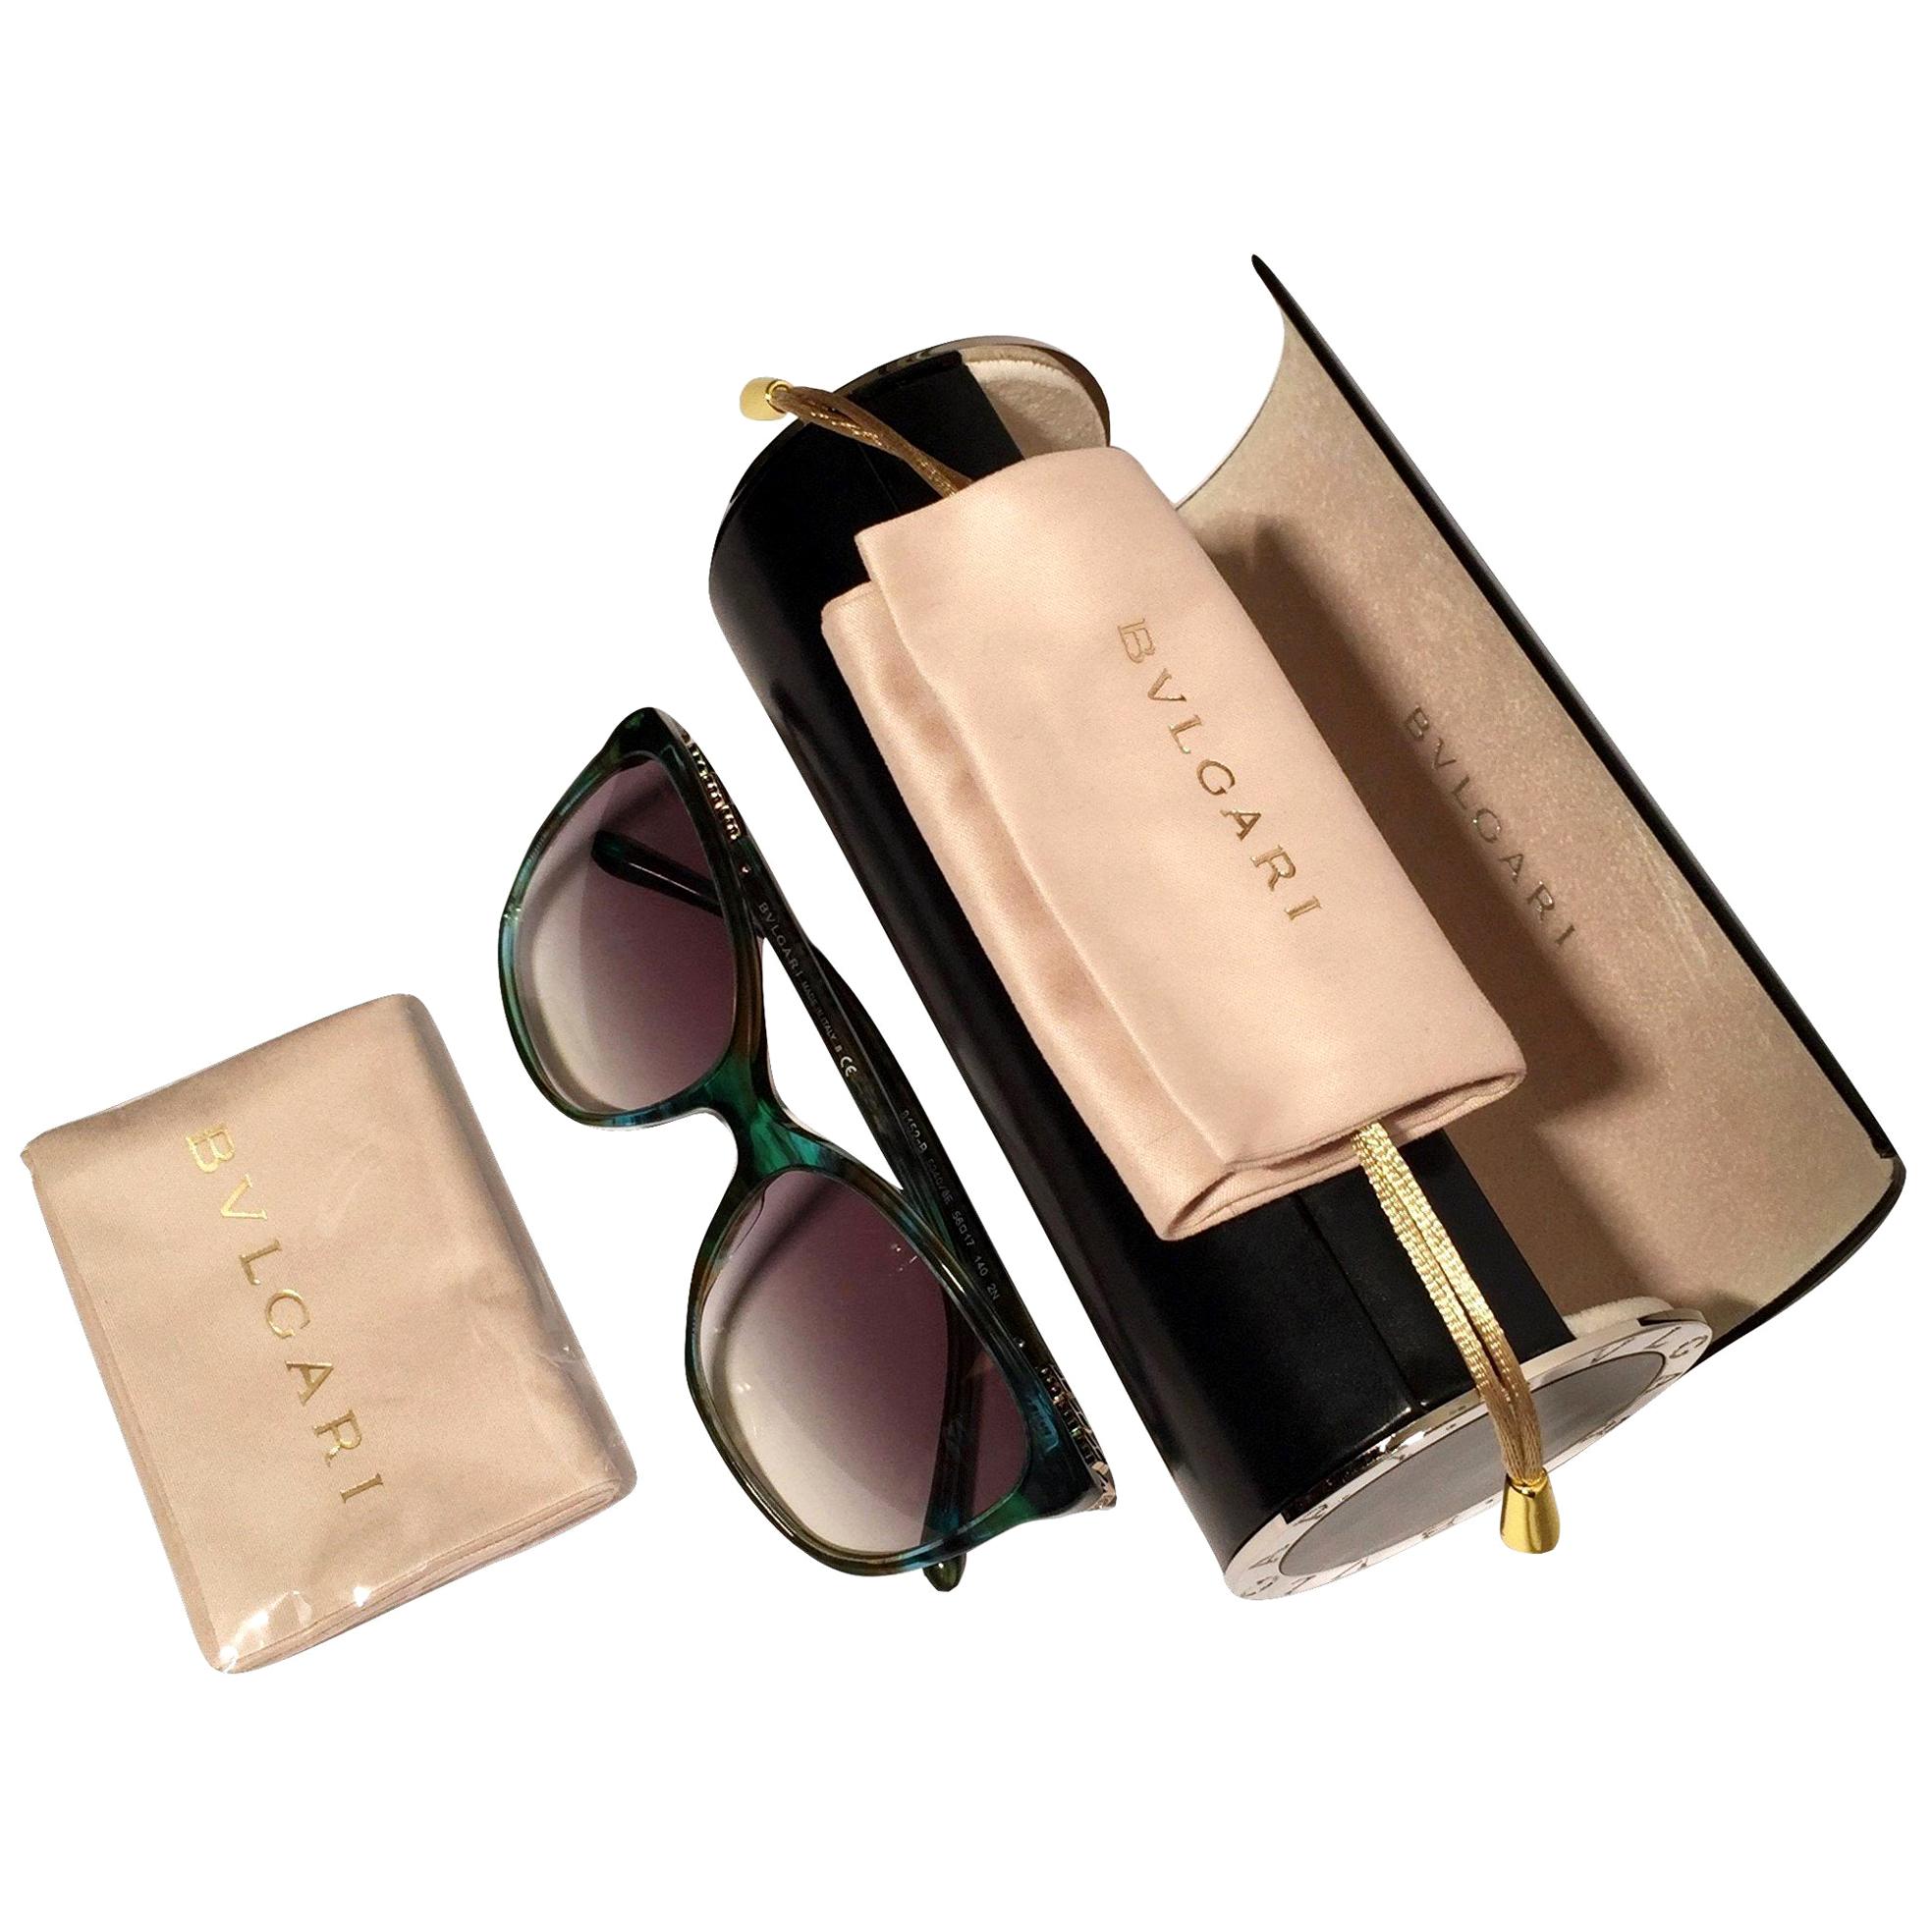 Bvlgari Emerald Sunglasses
Brand New
*Stunning Emerald Sunglasses
* Gradient Lenses
* Jeweled Detail on the Sides
* Bvlgari Etched on Lense
* Made in Italy
* 100% UVA/UVB Protection
* Comes with Cases & Cleaning Clothing